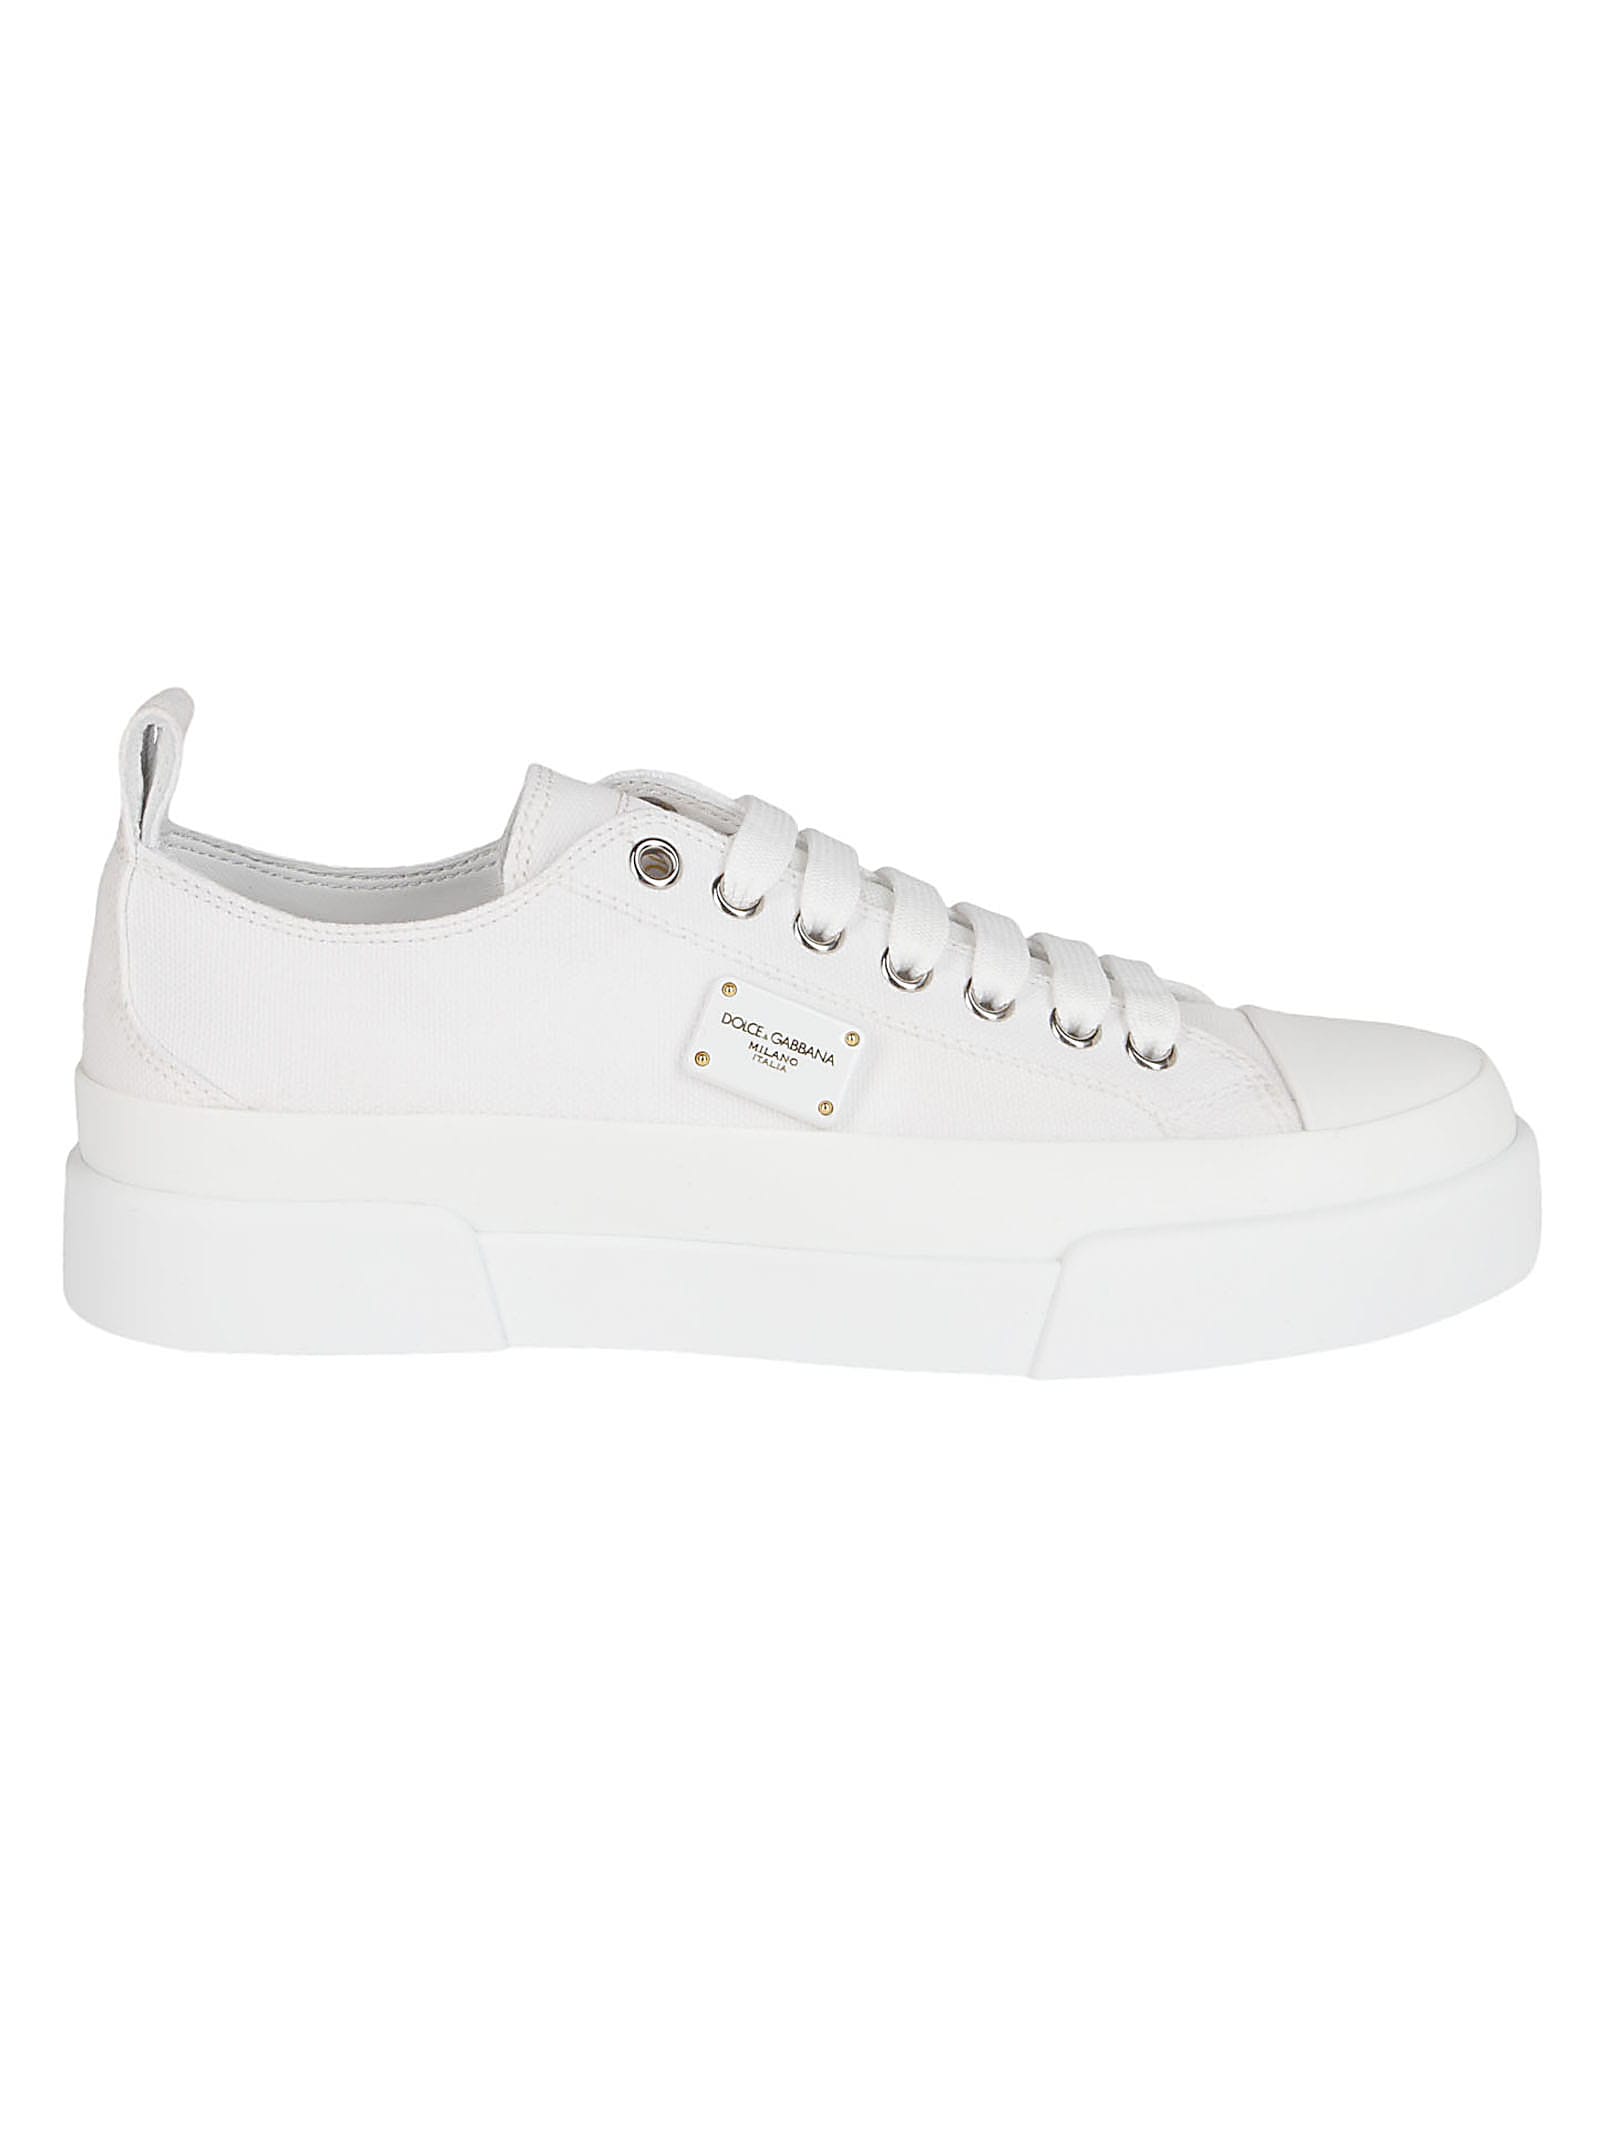 Dolce & Gabbana White Leather Sneakers In White Nude